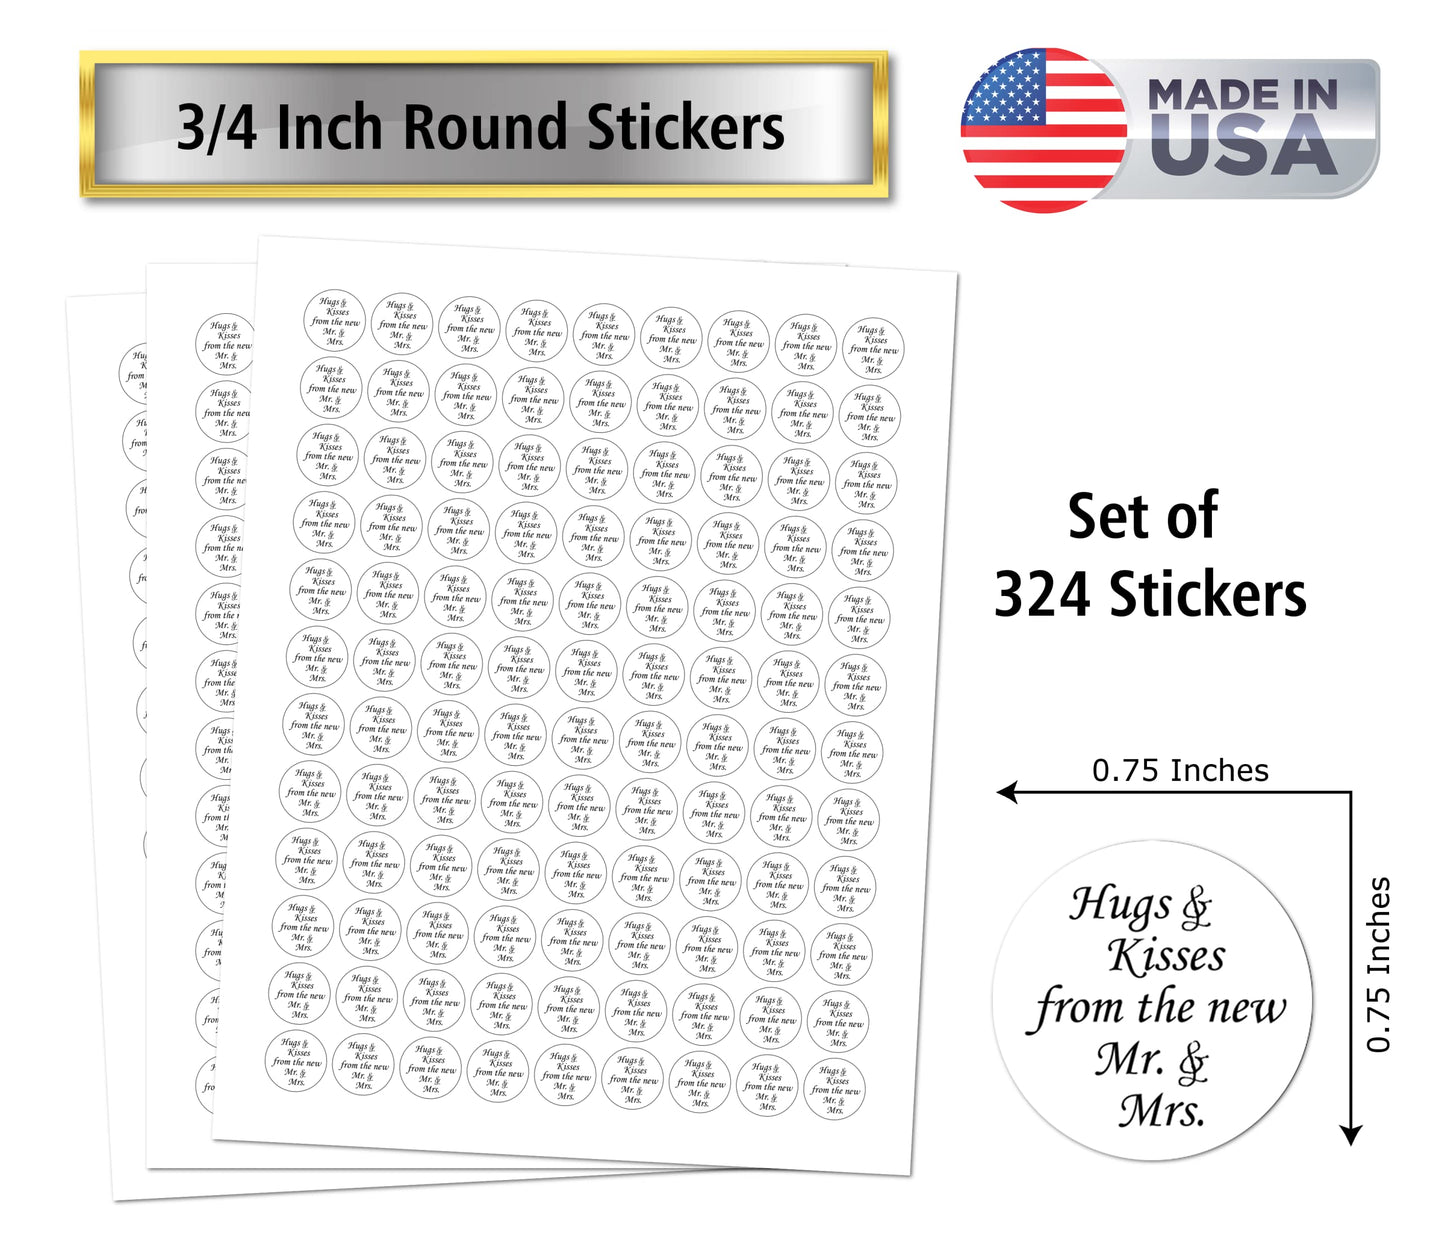 Set of 324 stickers size guide